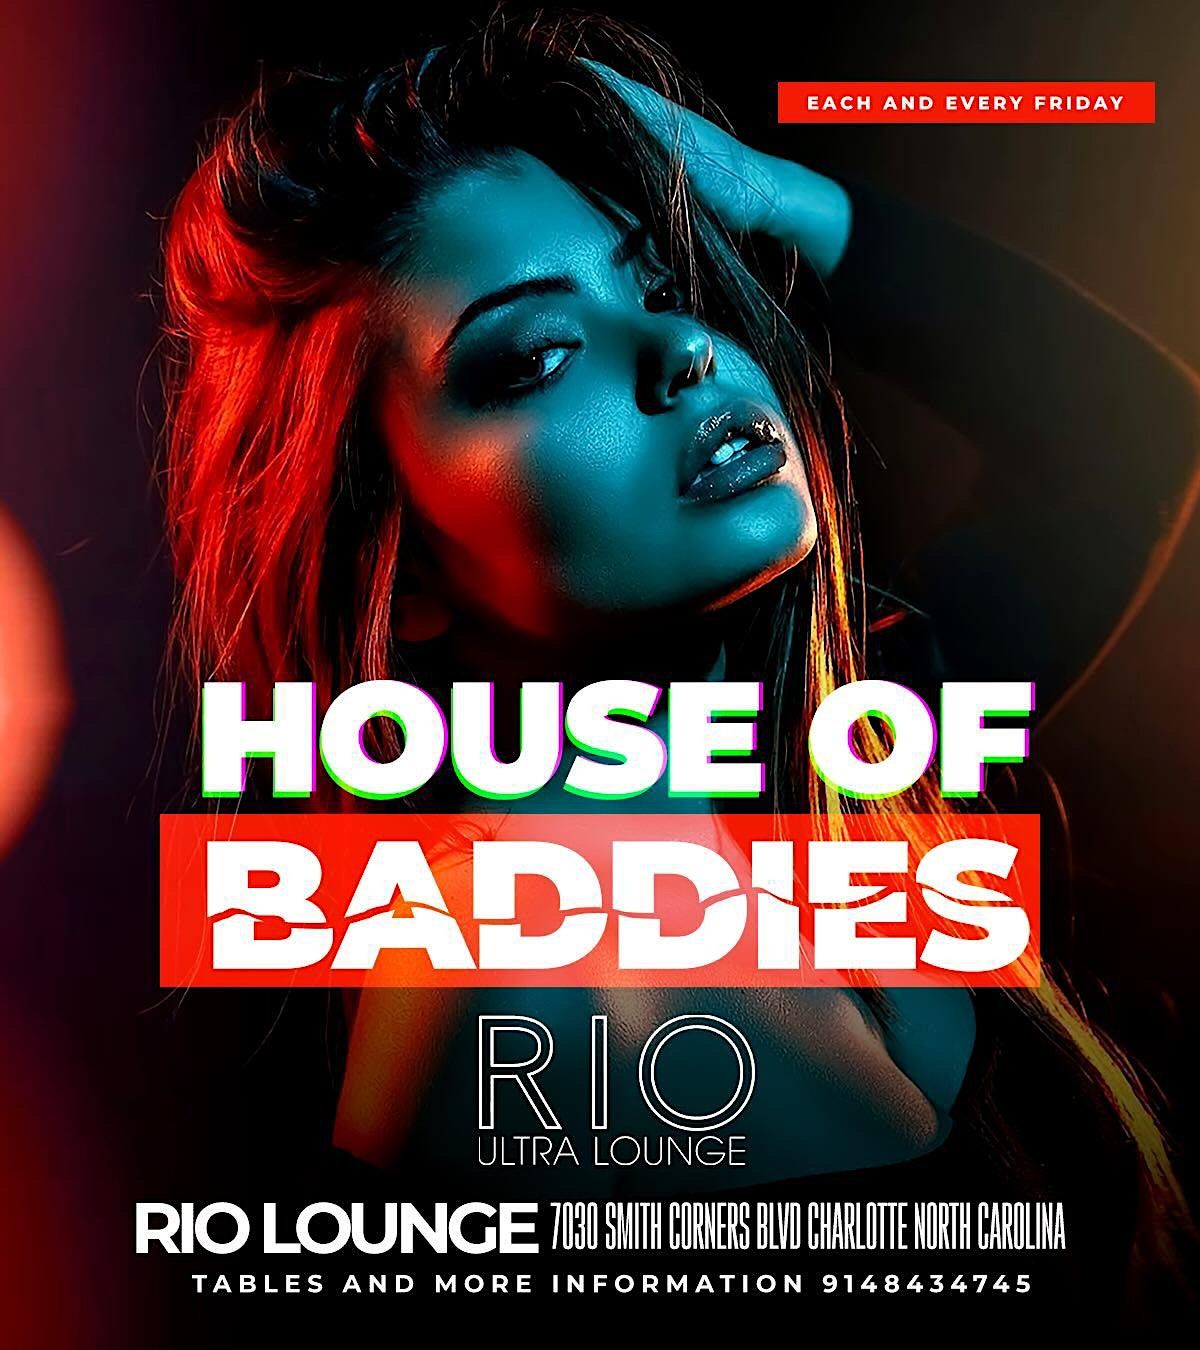 House of baddies each and every Friday